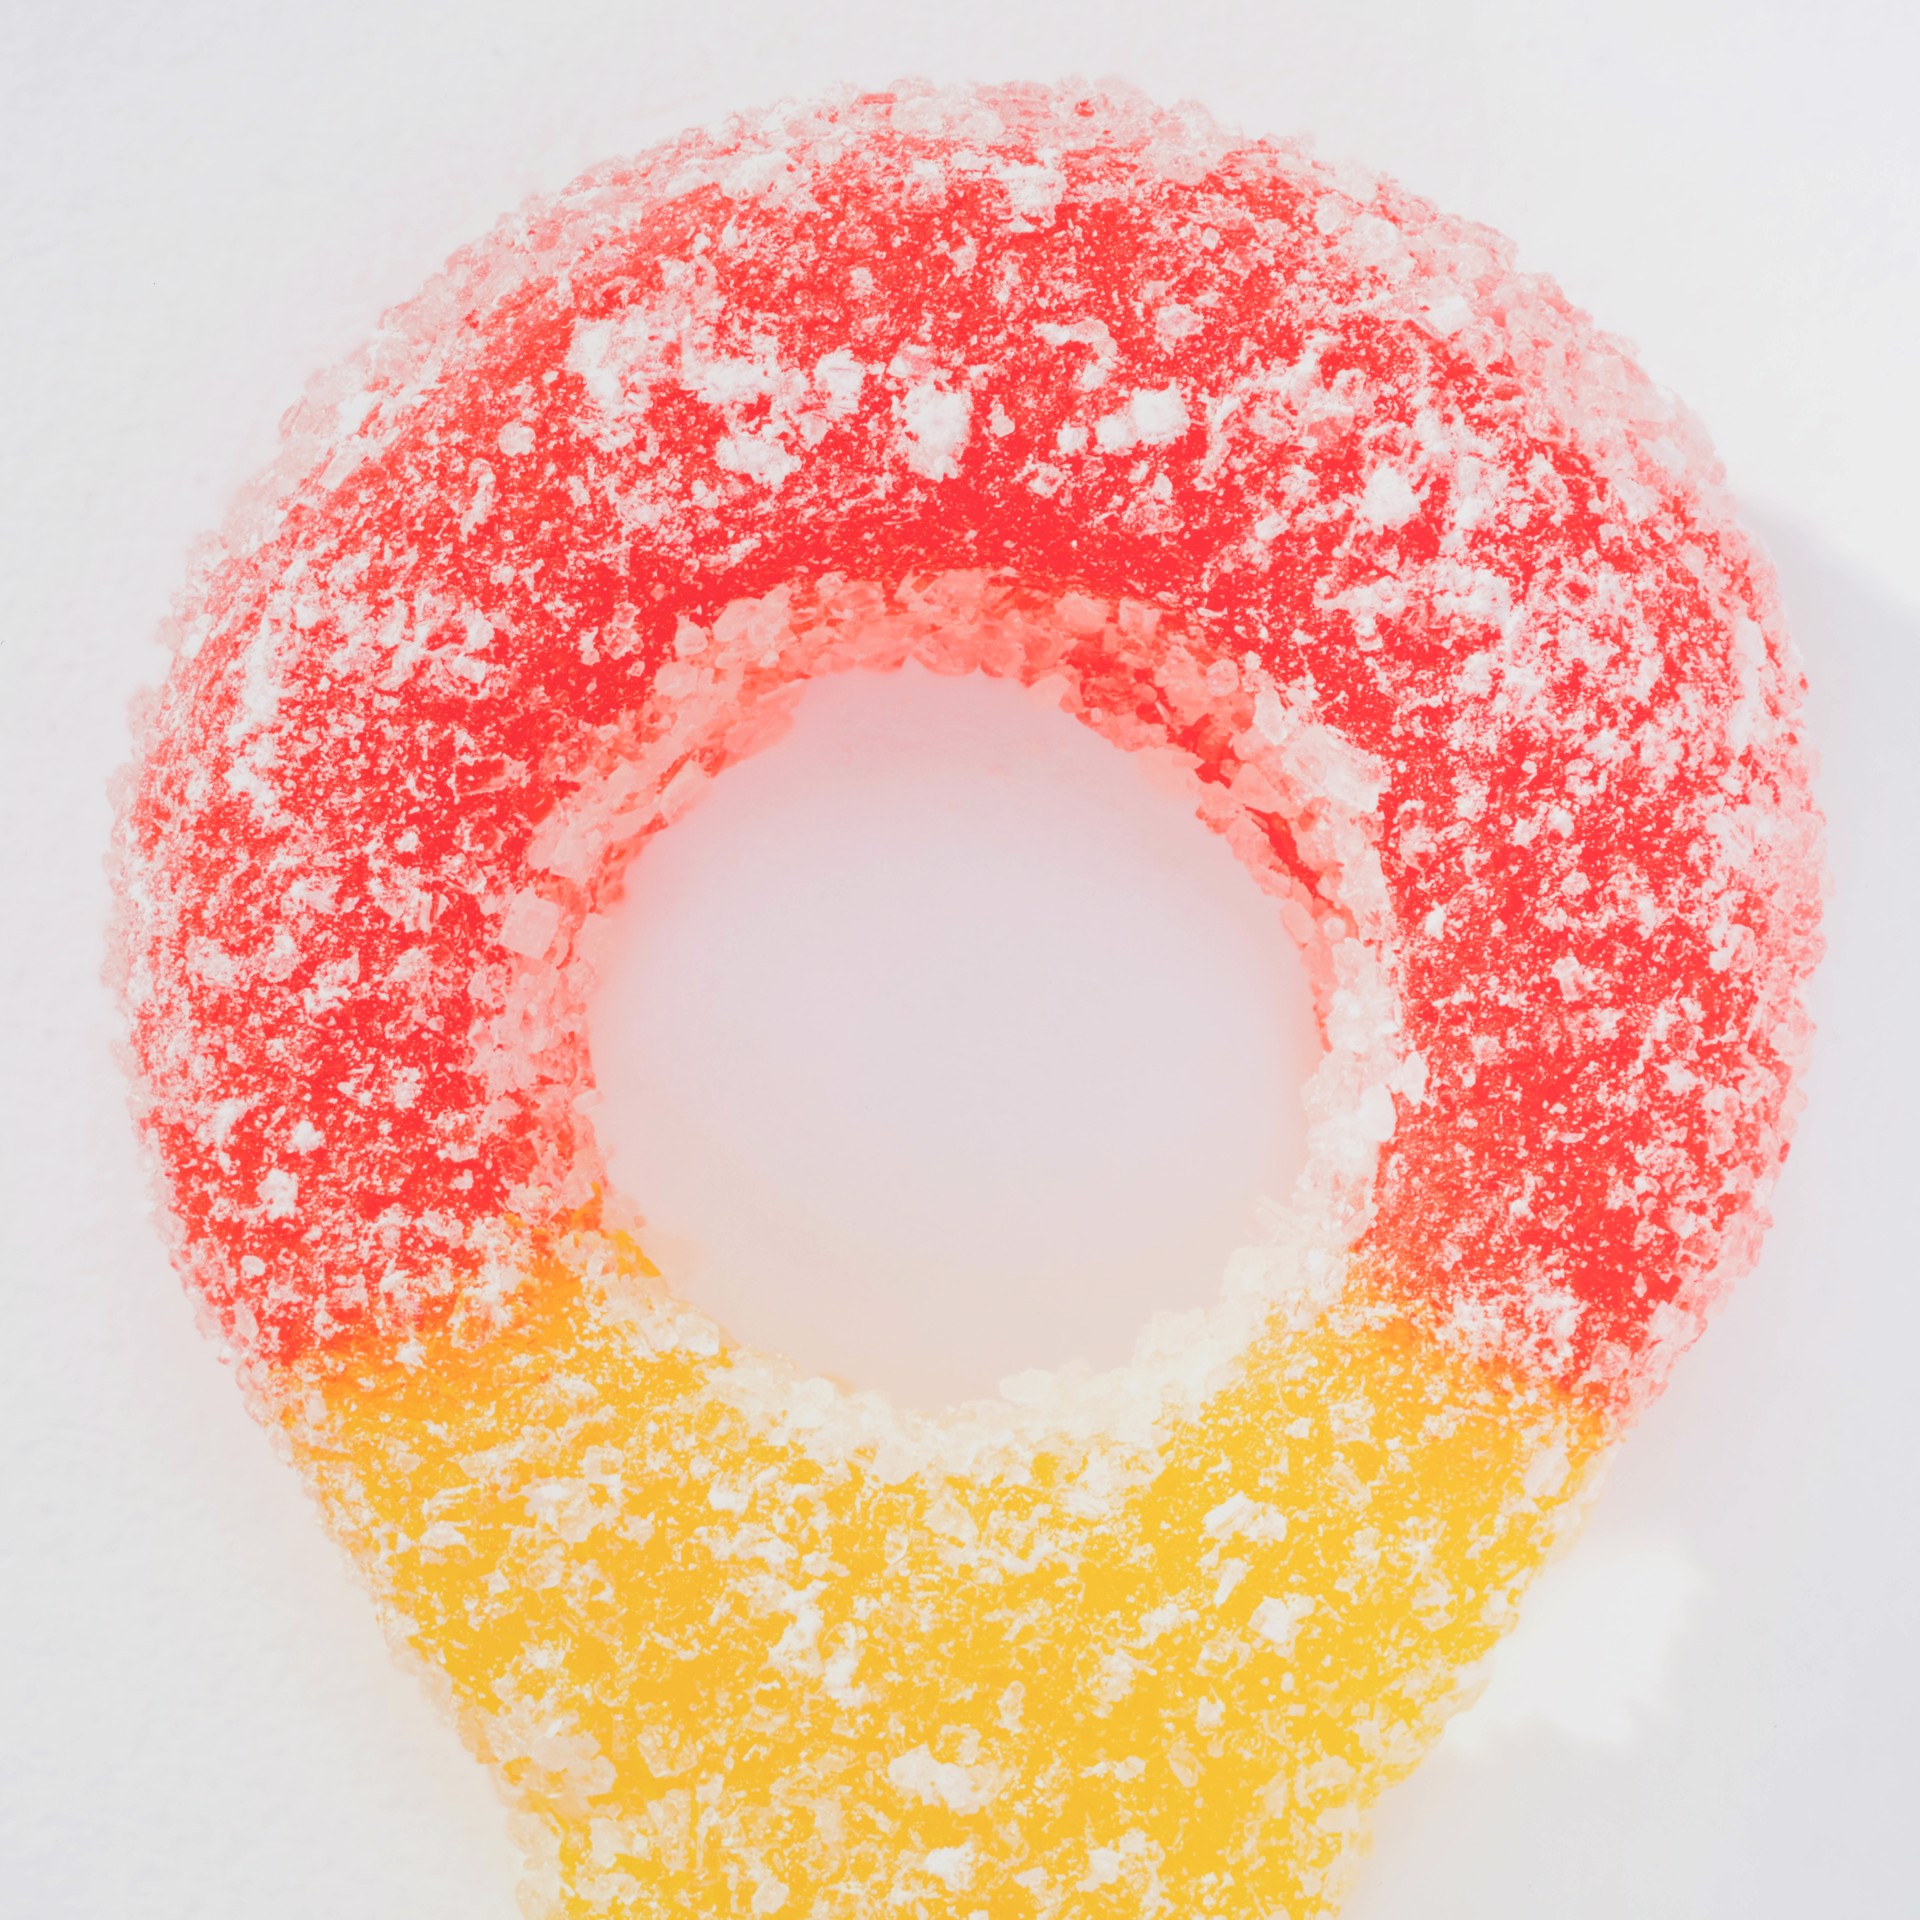 Sour Key - Yellow by Peter Andrew Lusztyk / Refined Sugar